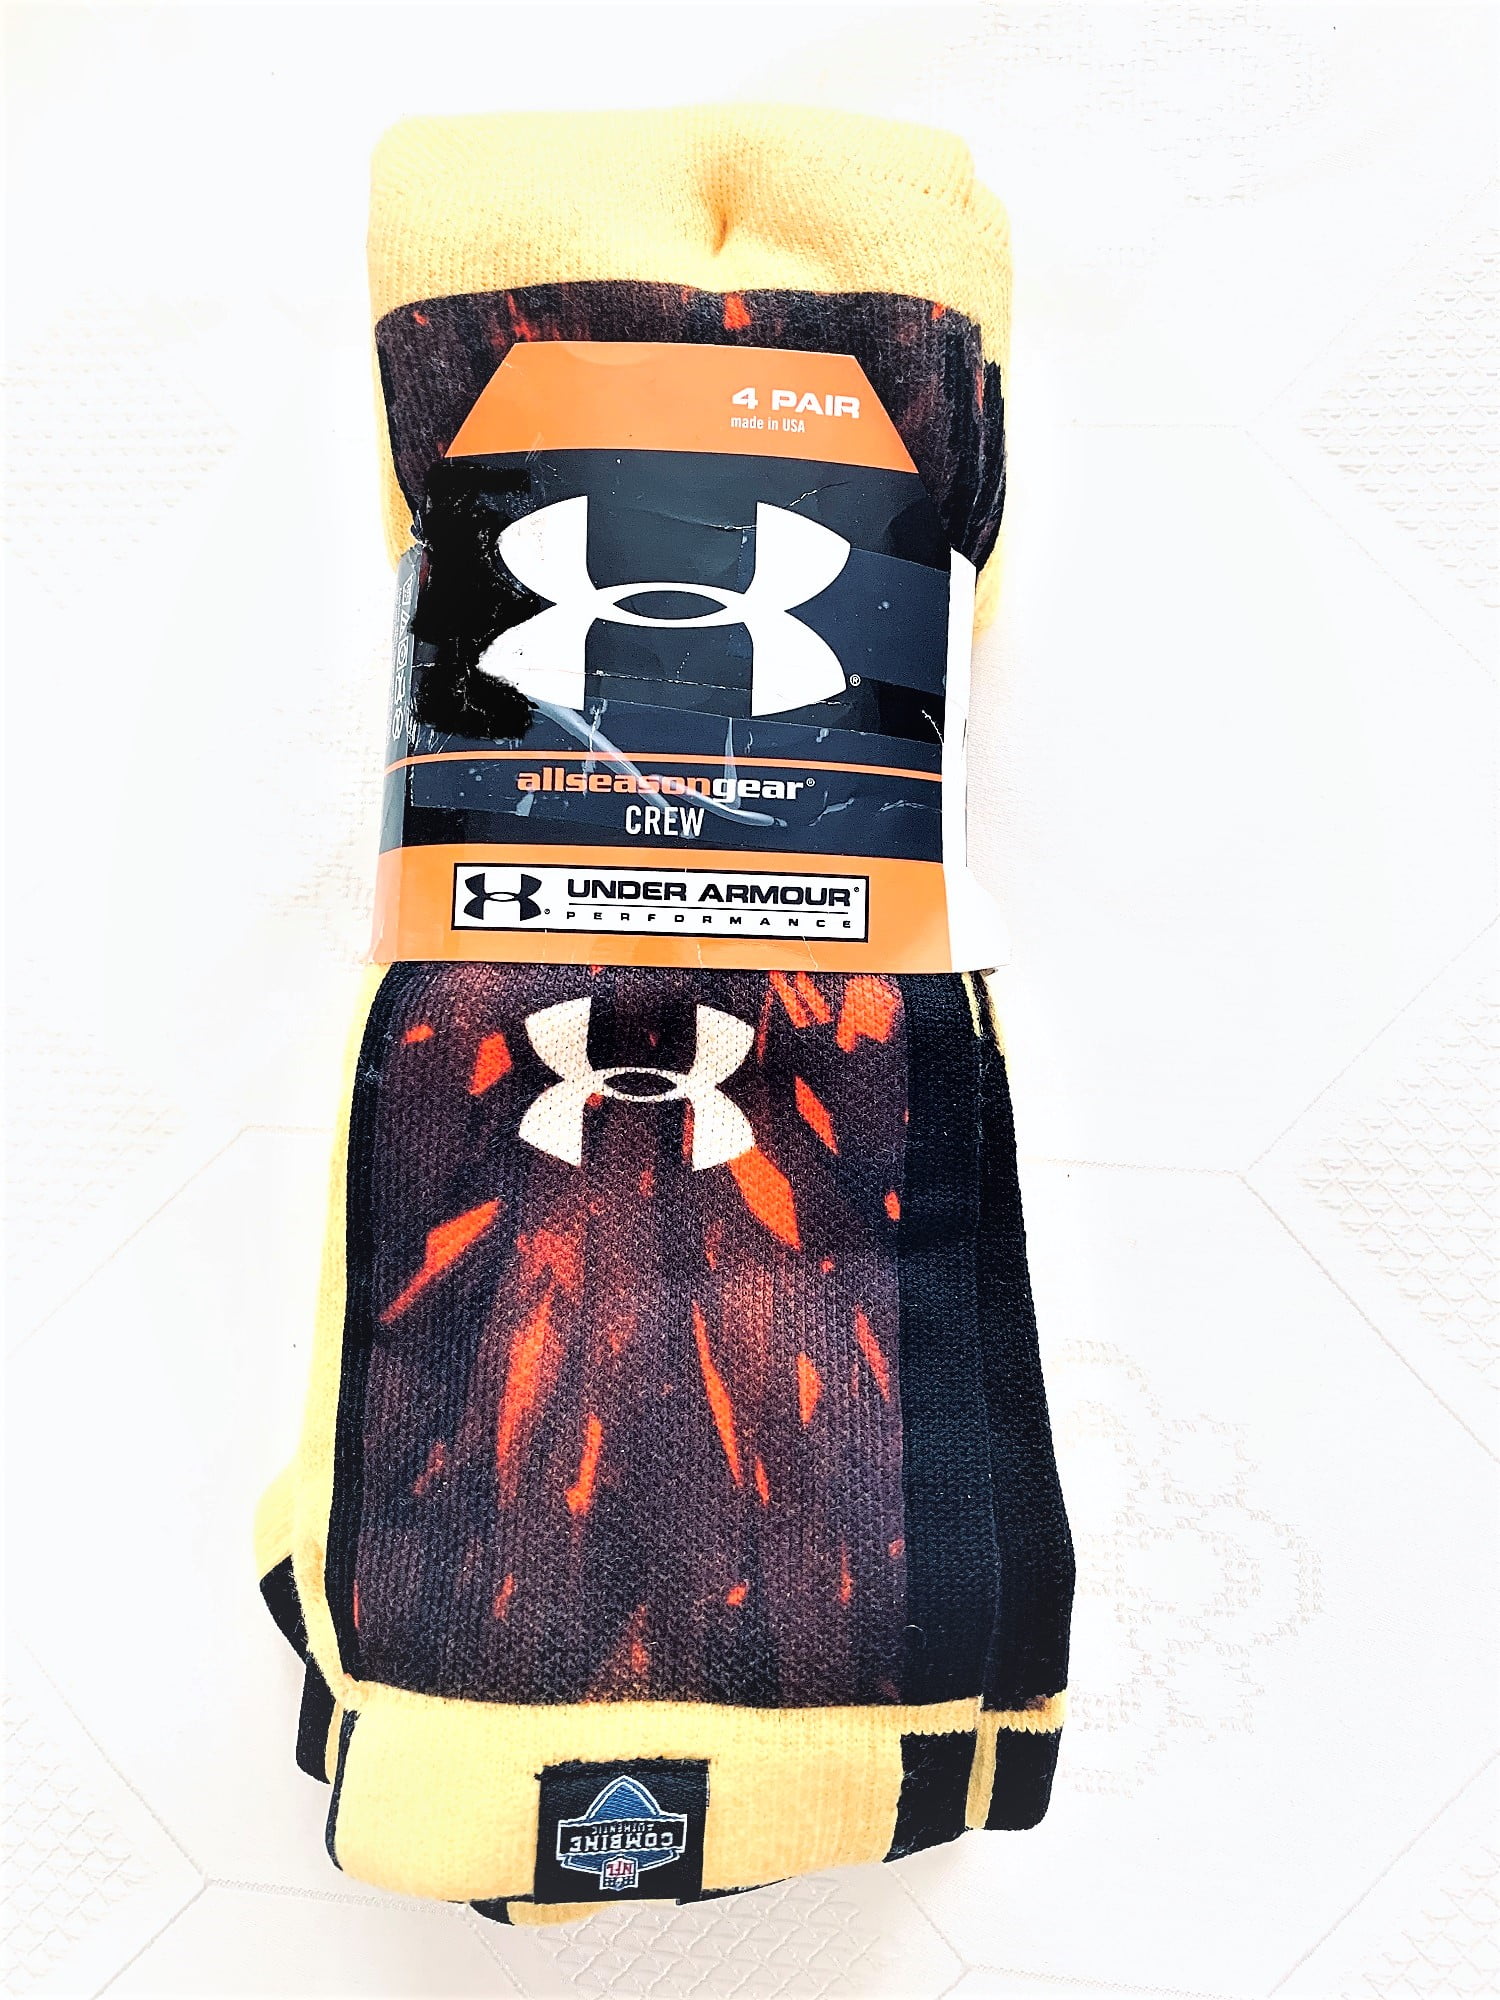 Under Armour NFL Combine Performance Crew Socks, Size Extra Large ...